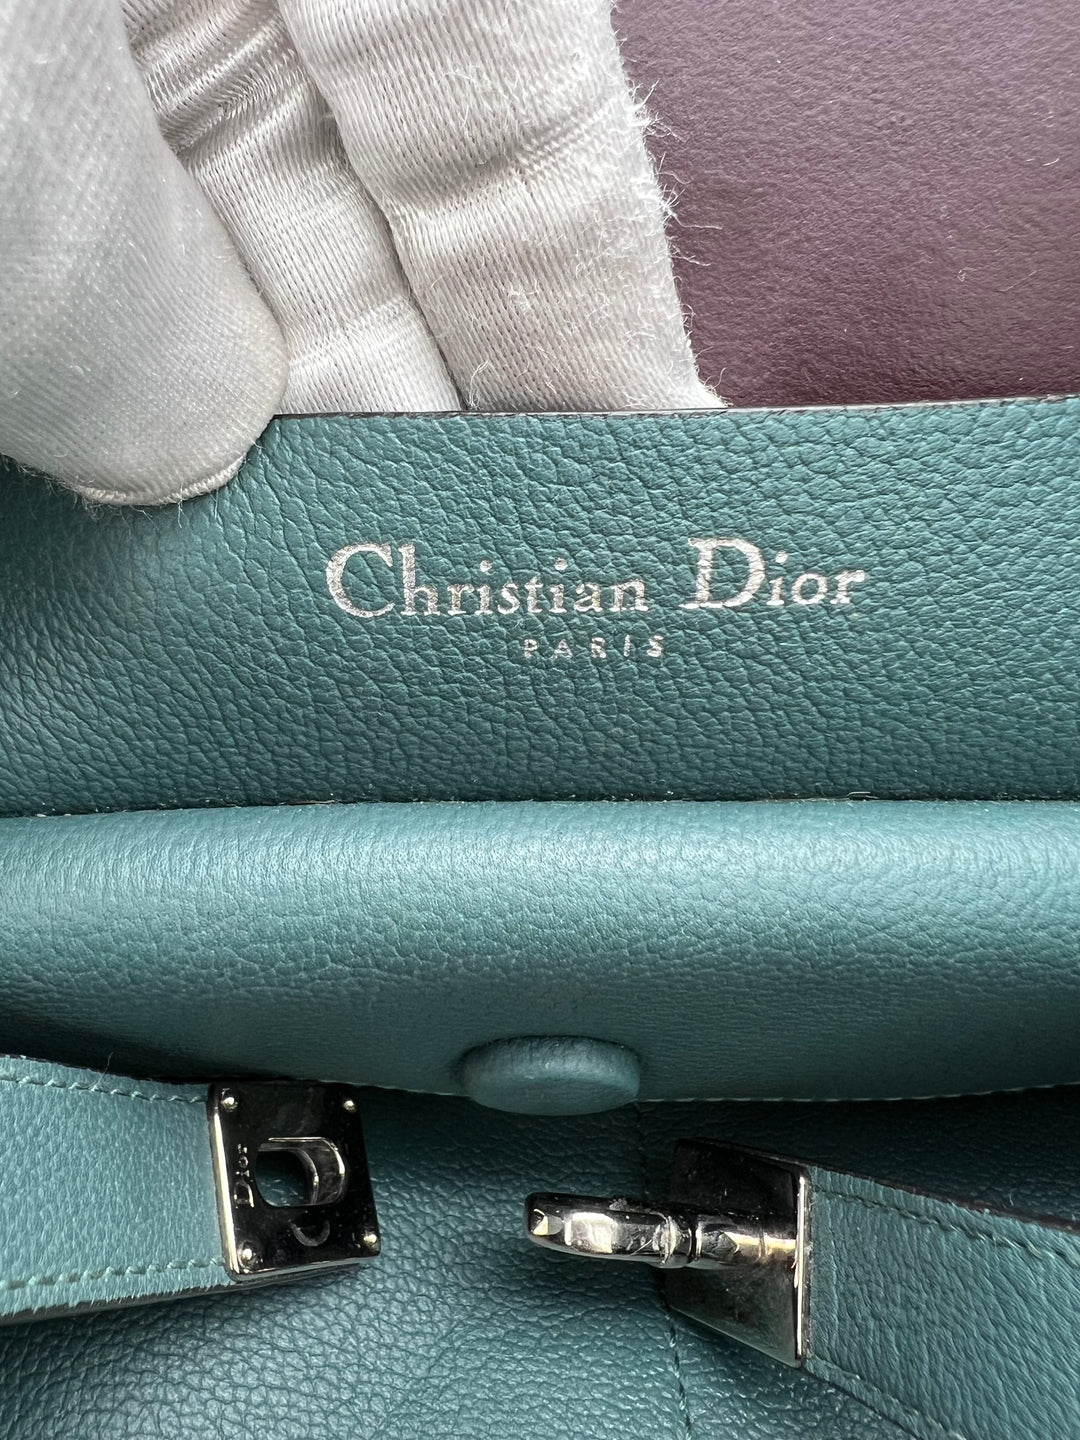 CHRISTIAN DIOR OPEN BAR LEATHER